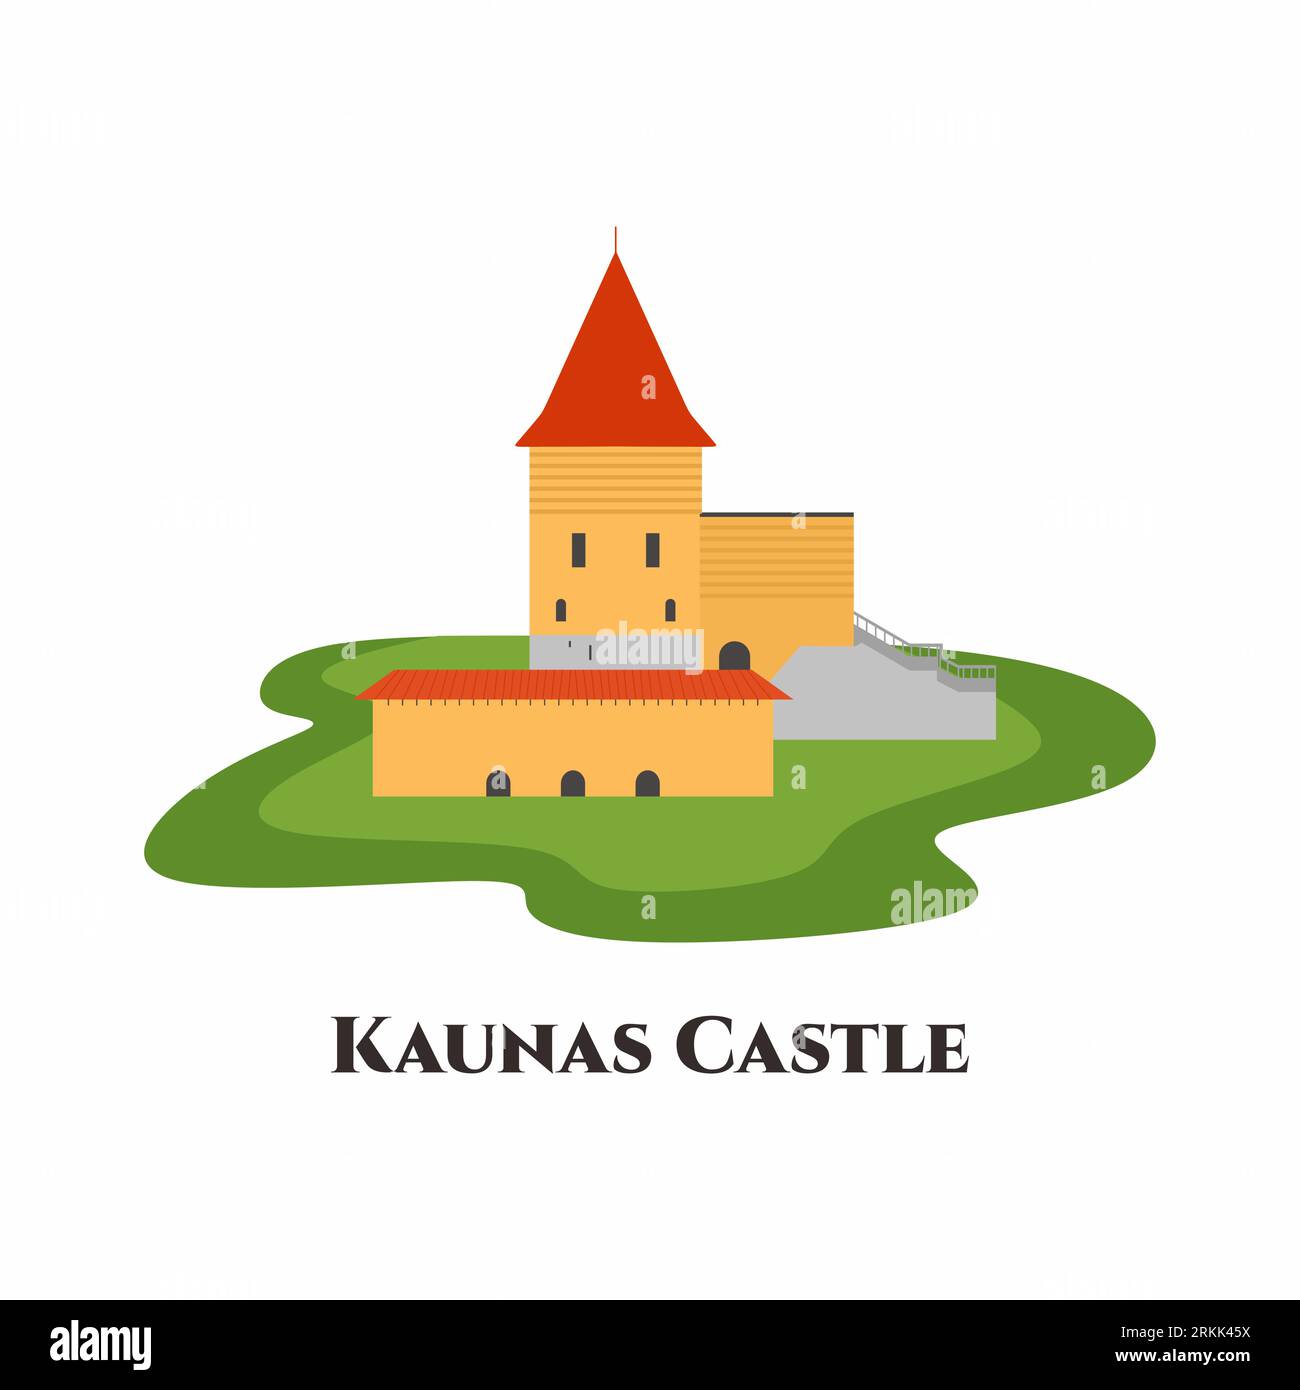 Kaunas Castle. It is a medieval castle in Kaunas, the second-largest city in Lithuania. It was beautiful and located near the old town. Worth a visit. Stock Vector